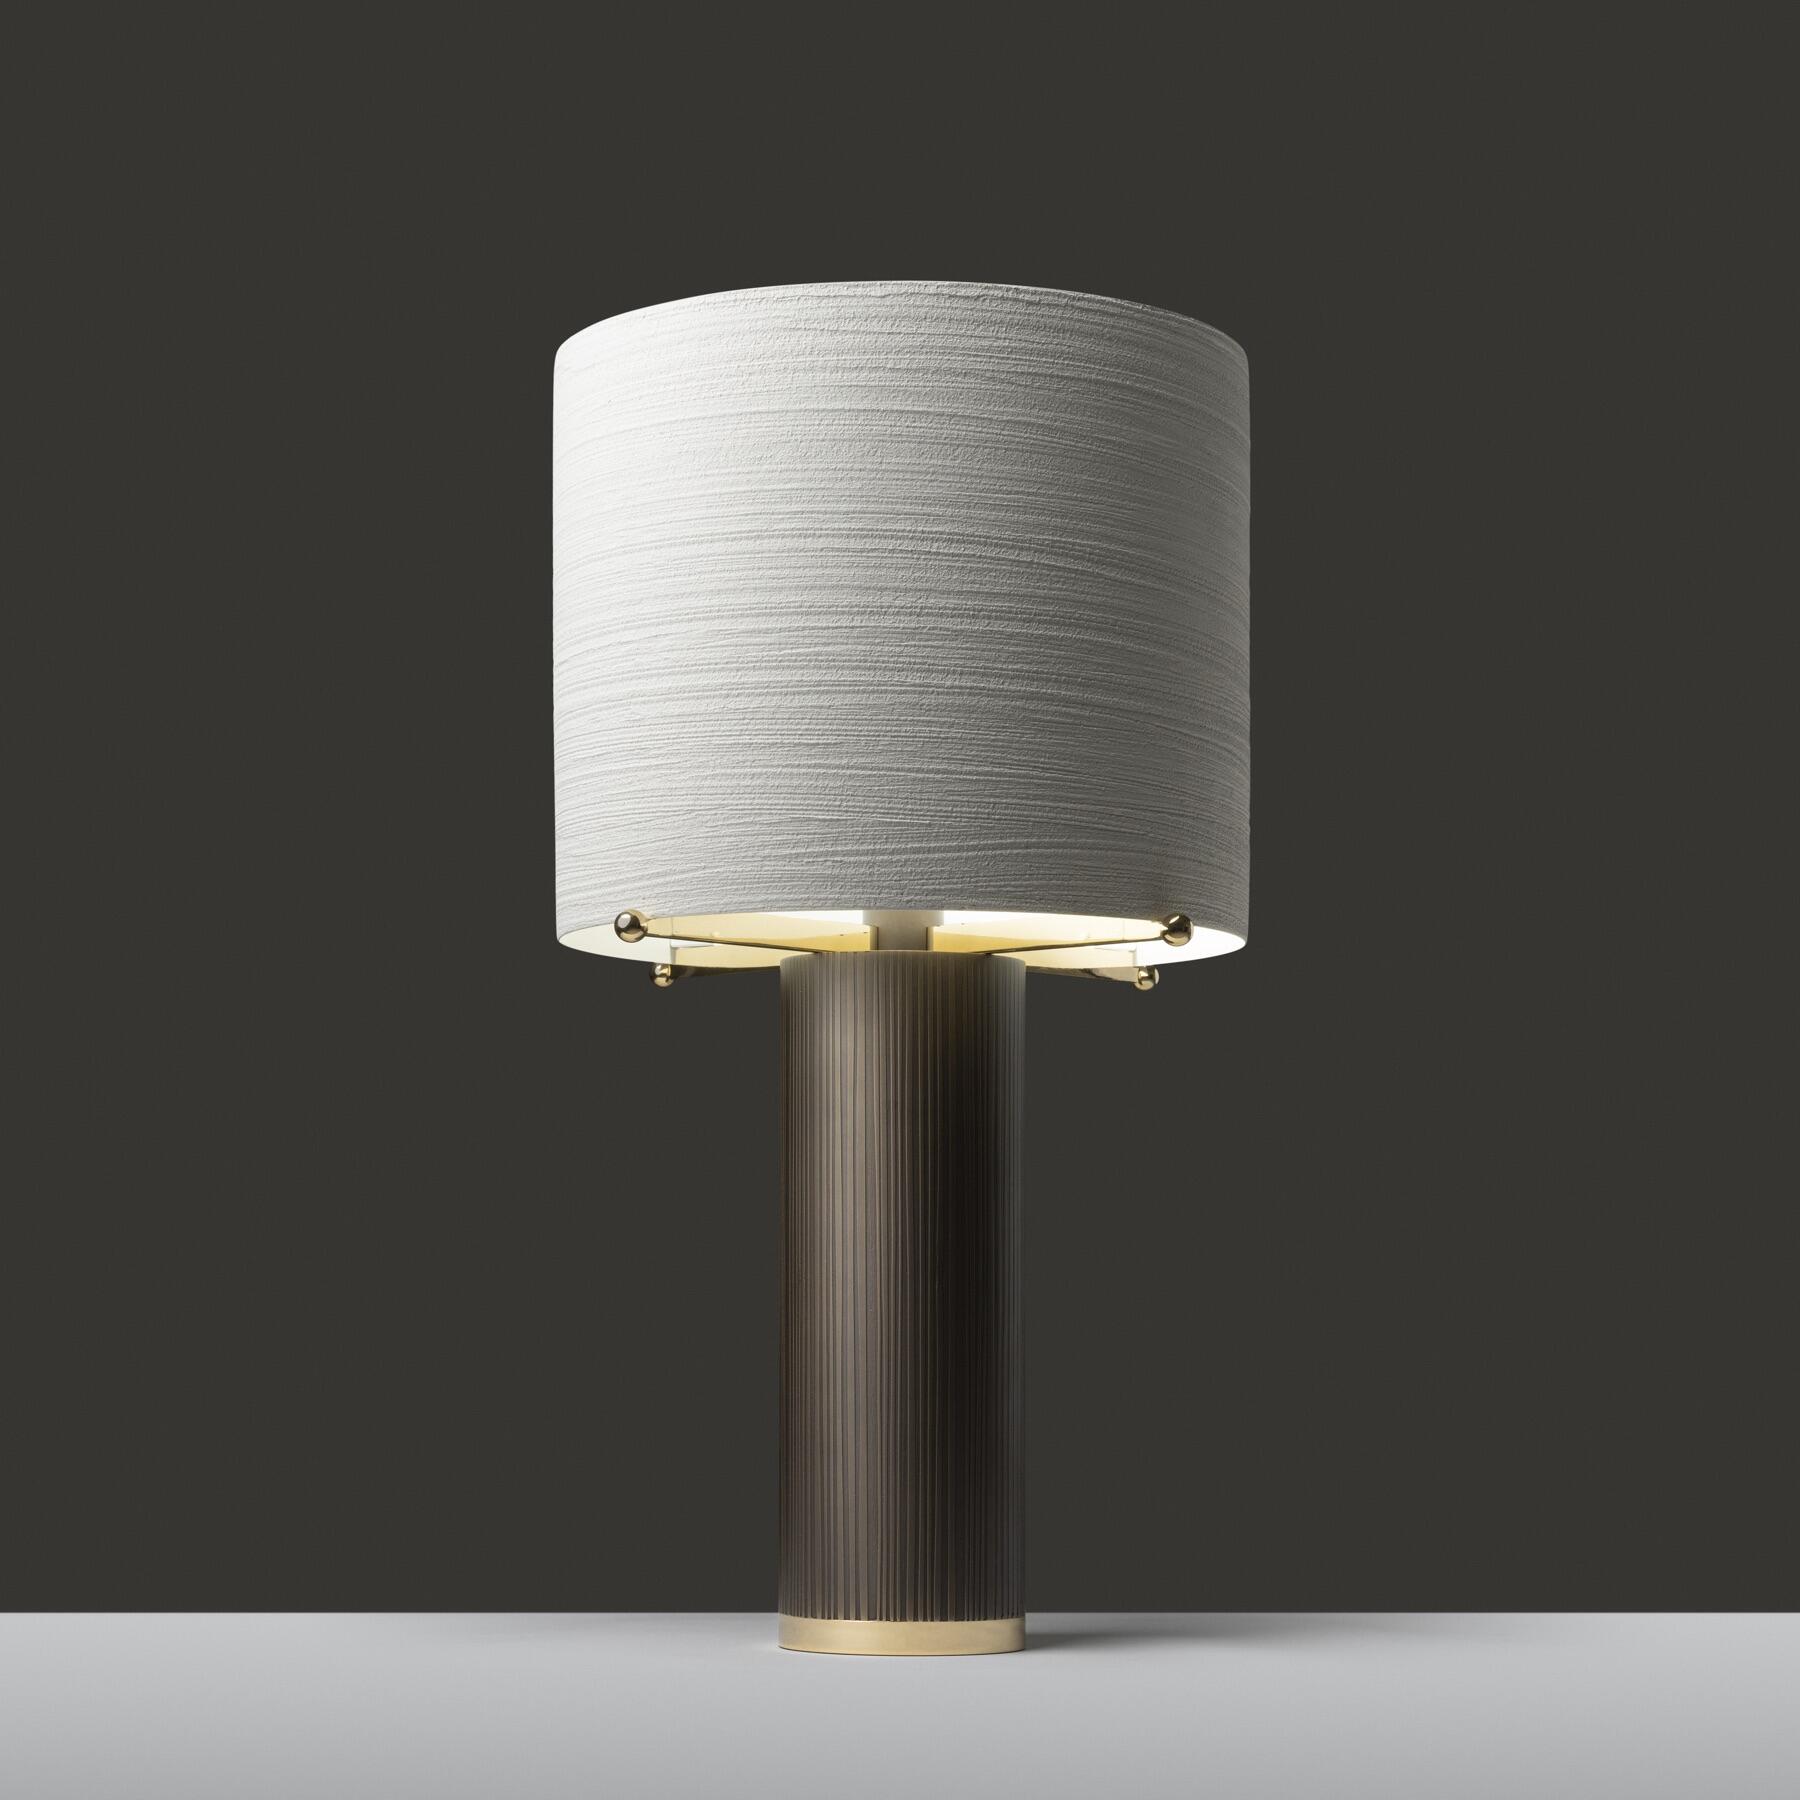 Sorbet Table Lamp, Etched Brass, Textured Plaster Shade